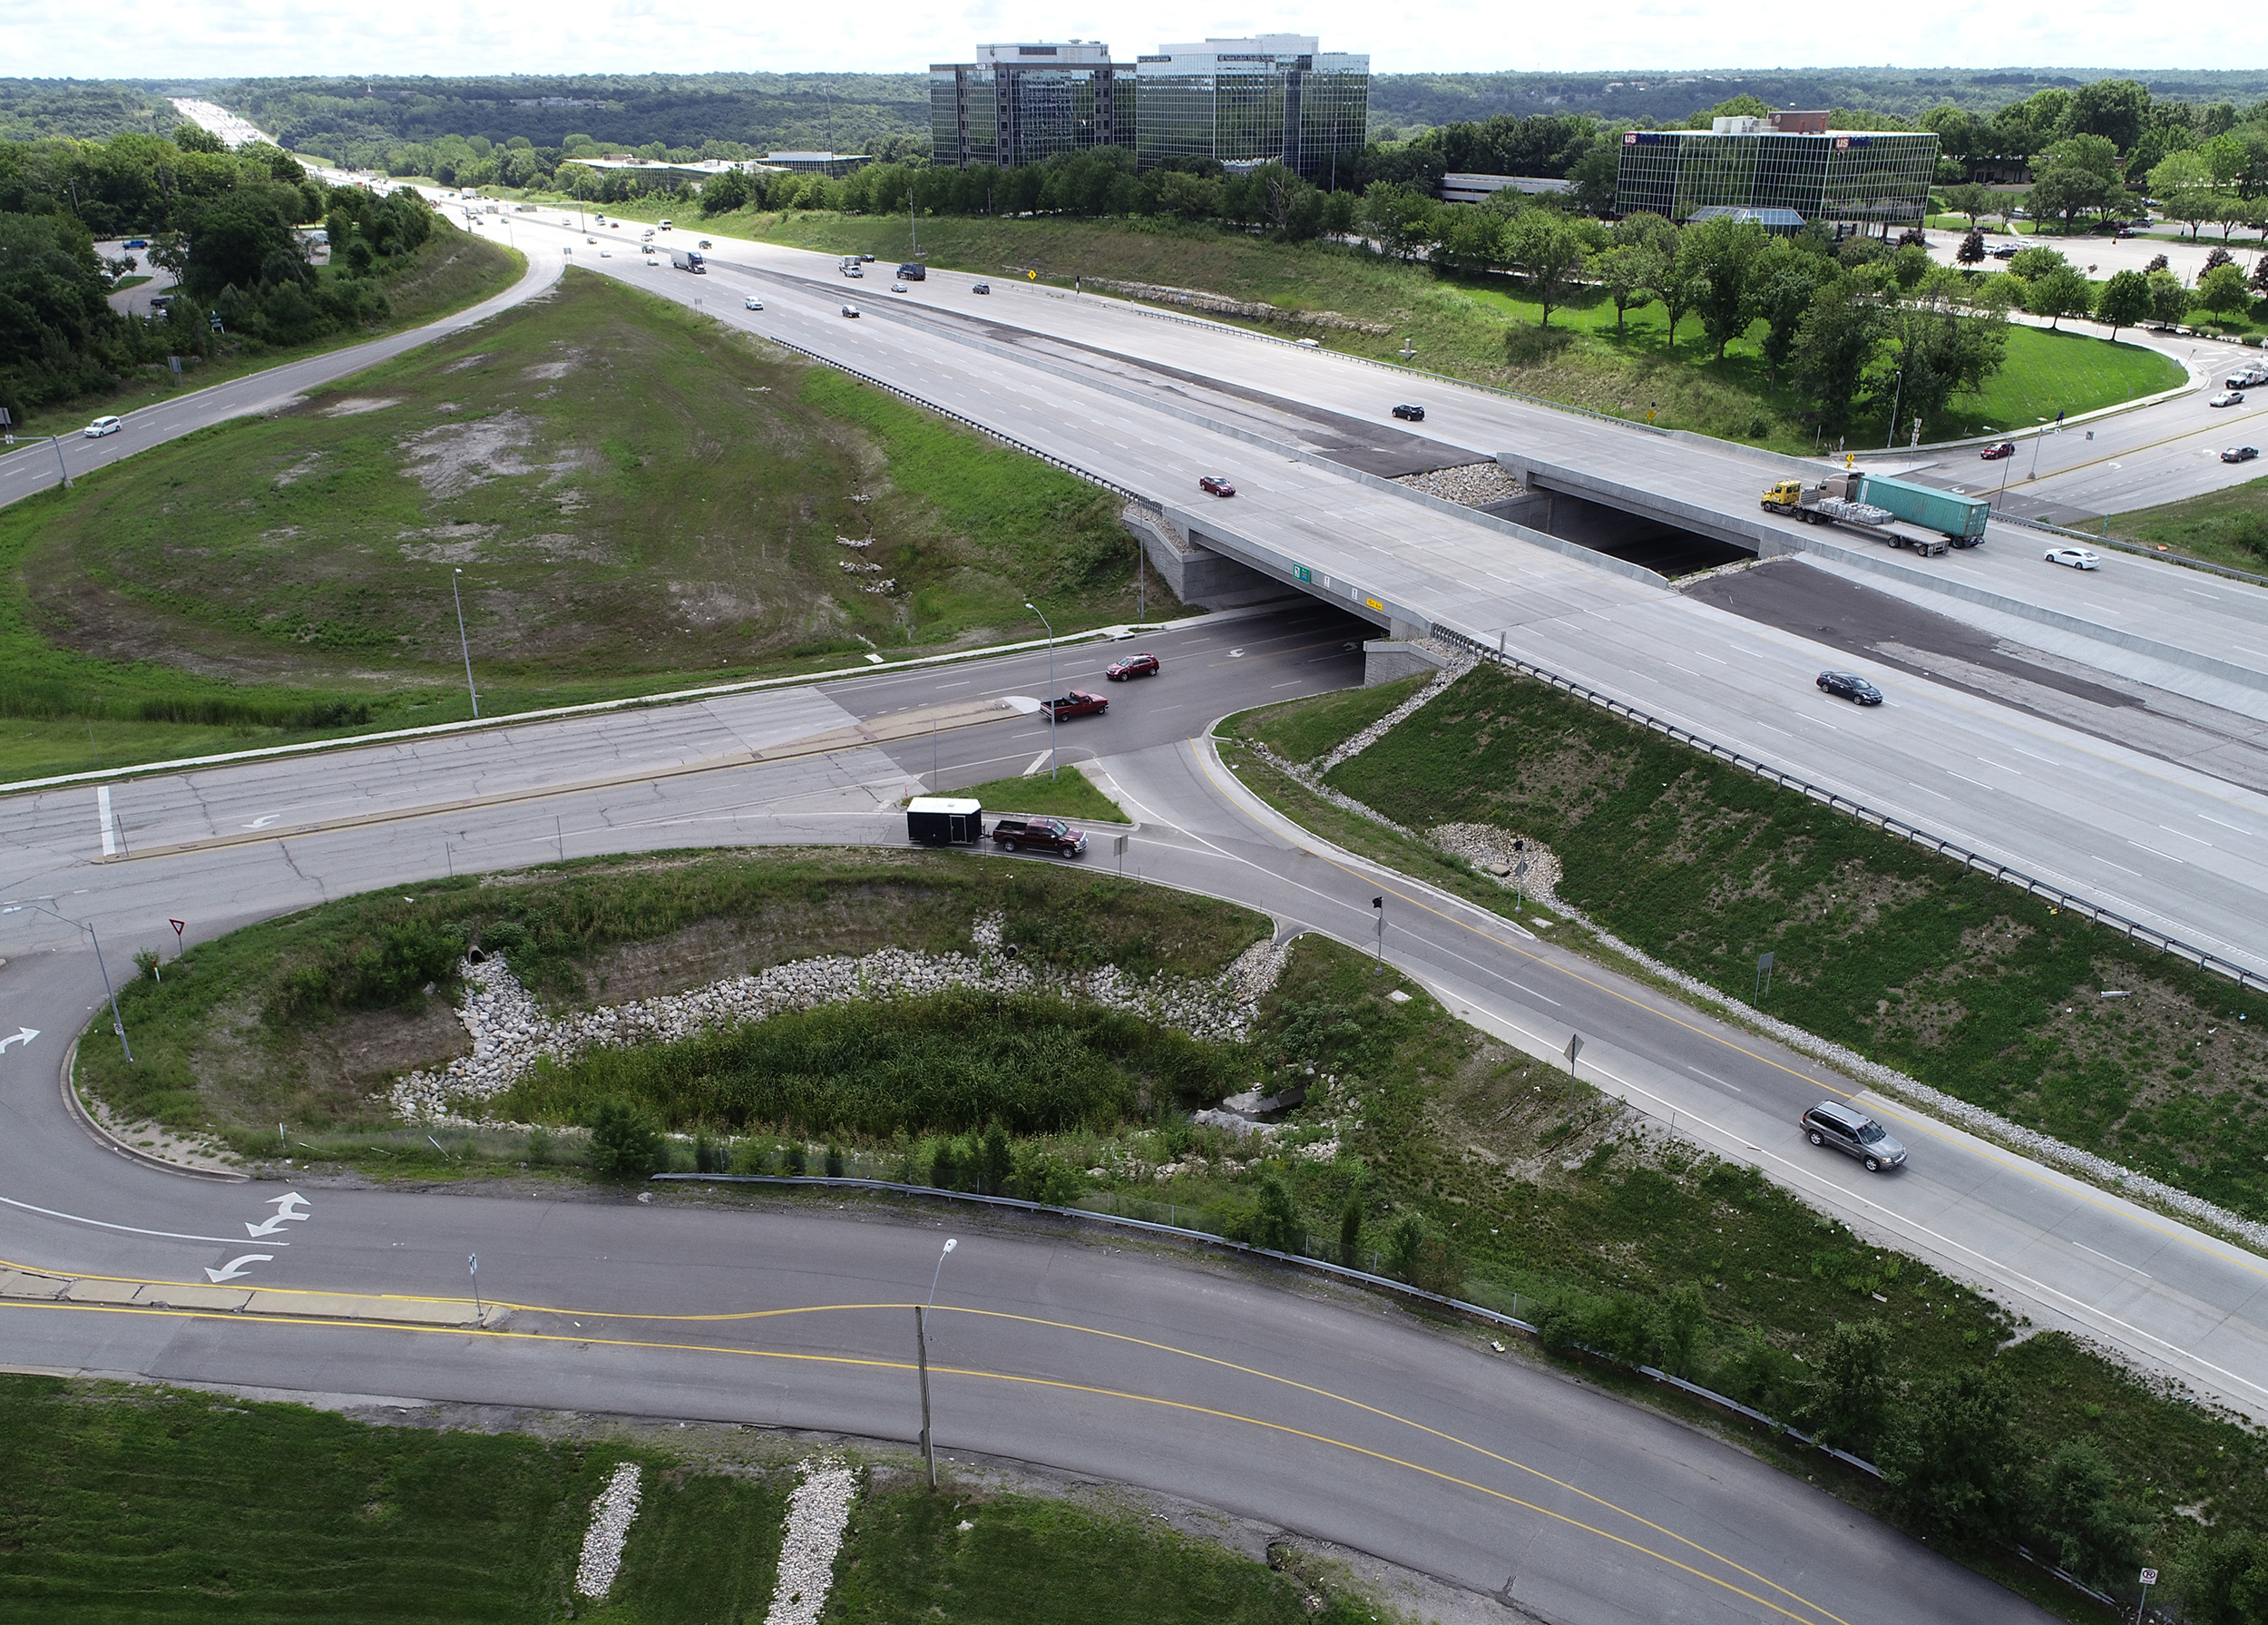 This area of I-435 is one of the most heavily traveled sections of interstate in the Kansas City area and required thoughtful planning during the design and construction phases.